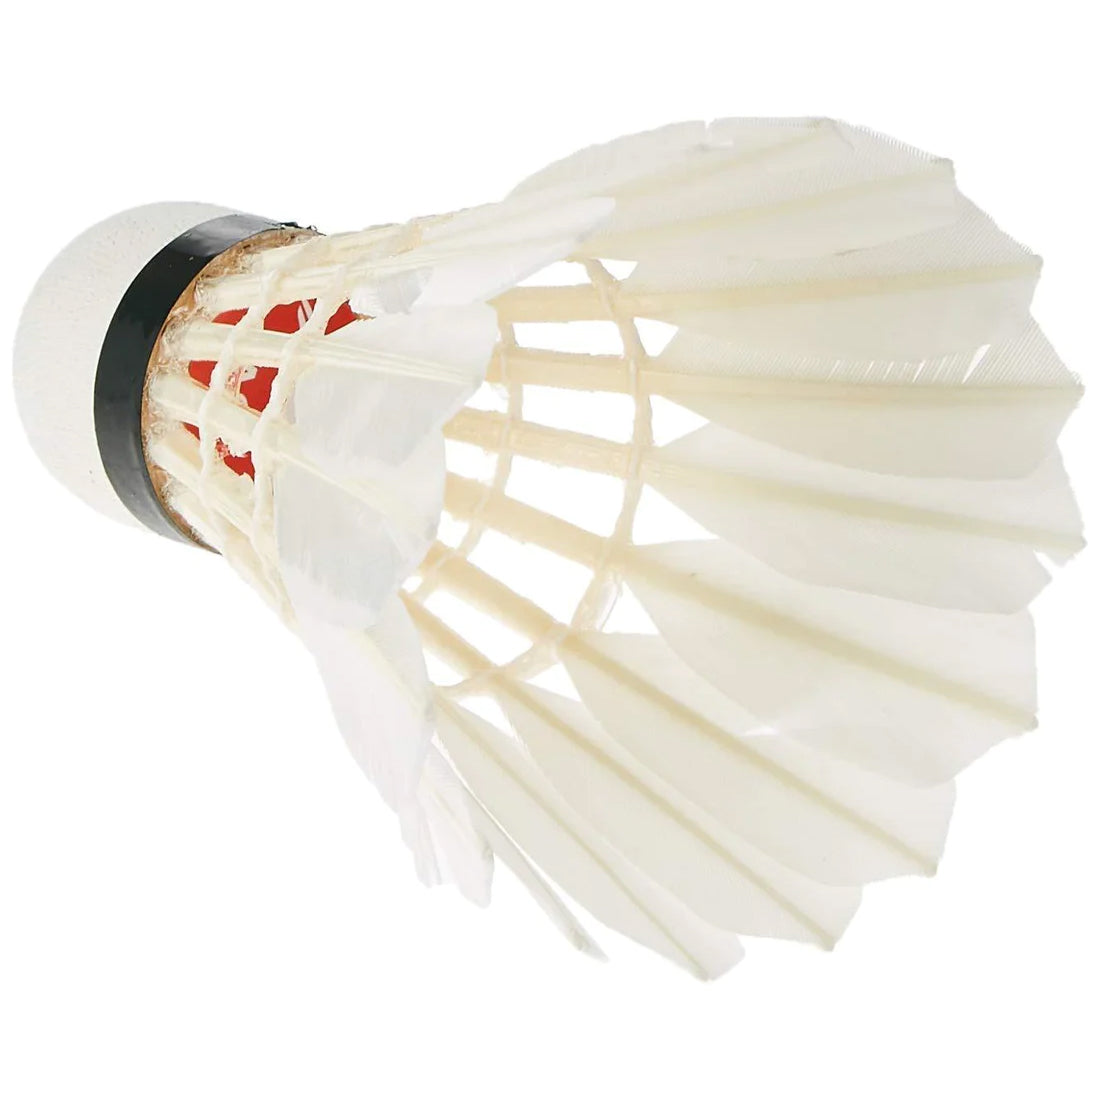 Li-Ning SG Gold Competition Shuttlecock Feather 77 (White) - Best Price online Prokicksports.com